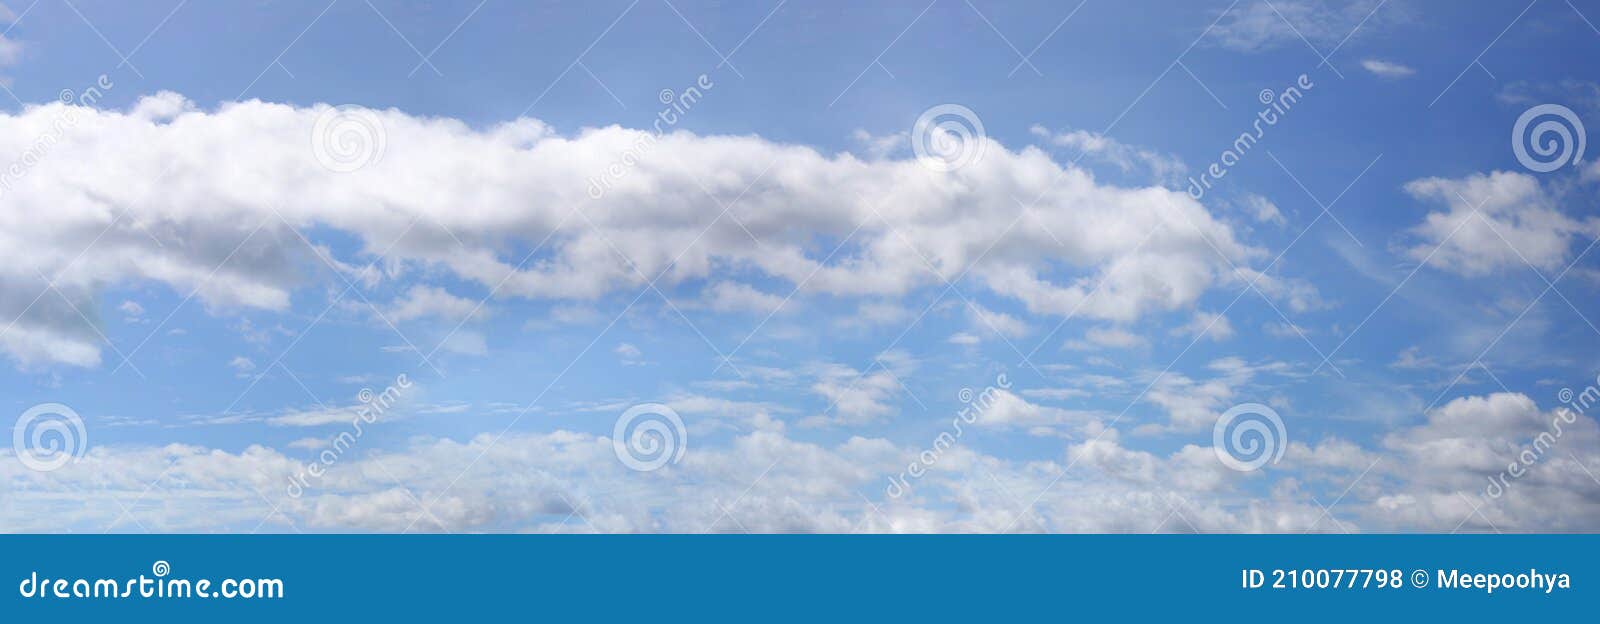 panorama blue sky with white clouds in the daytime background